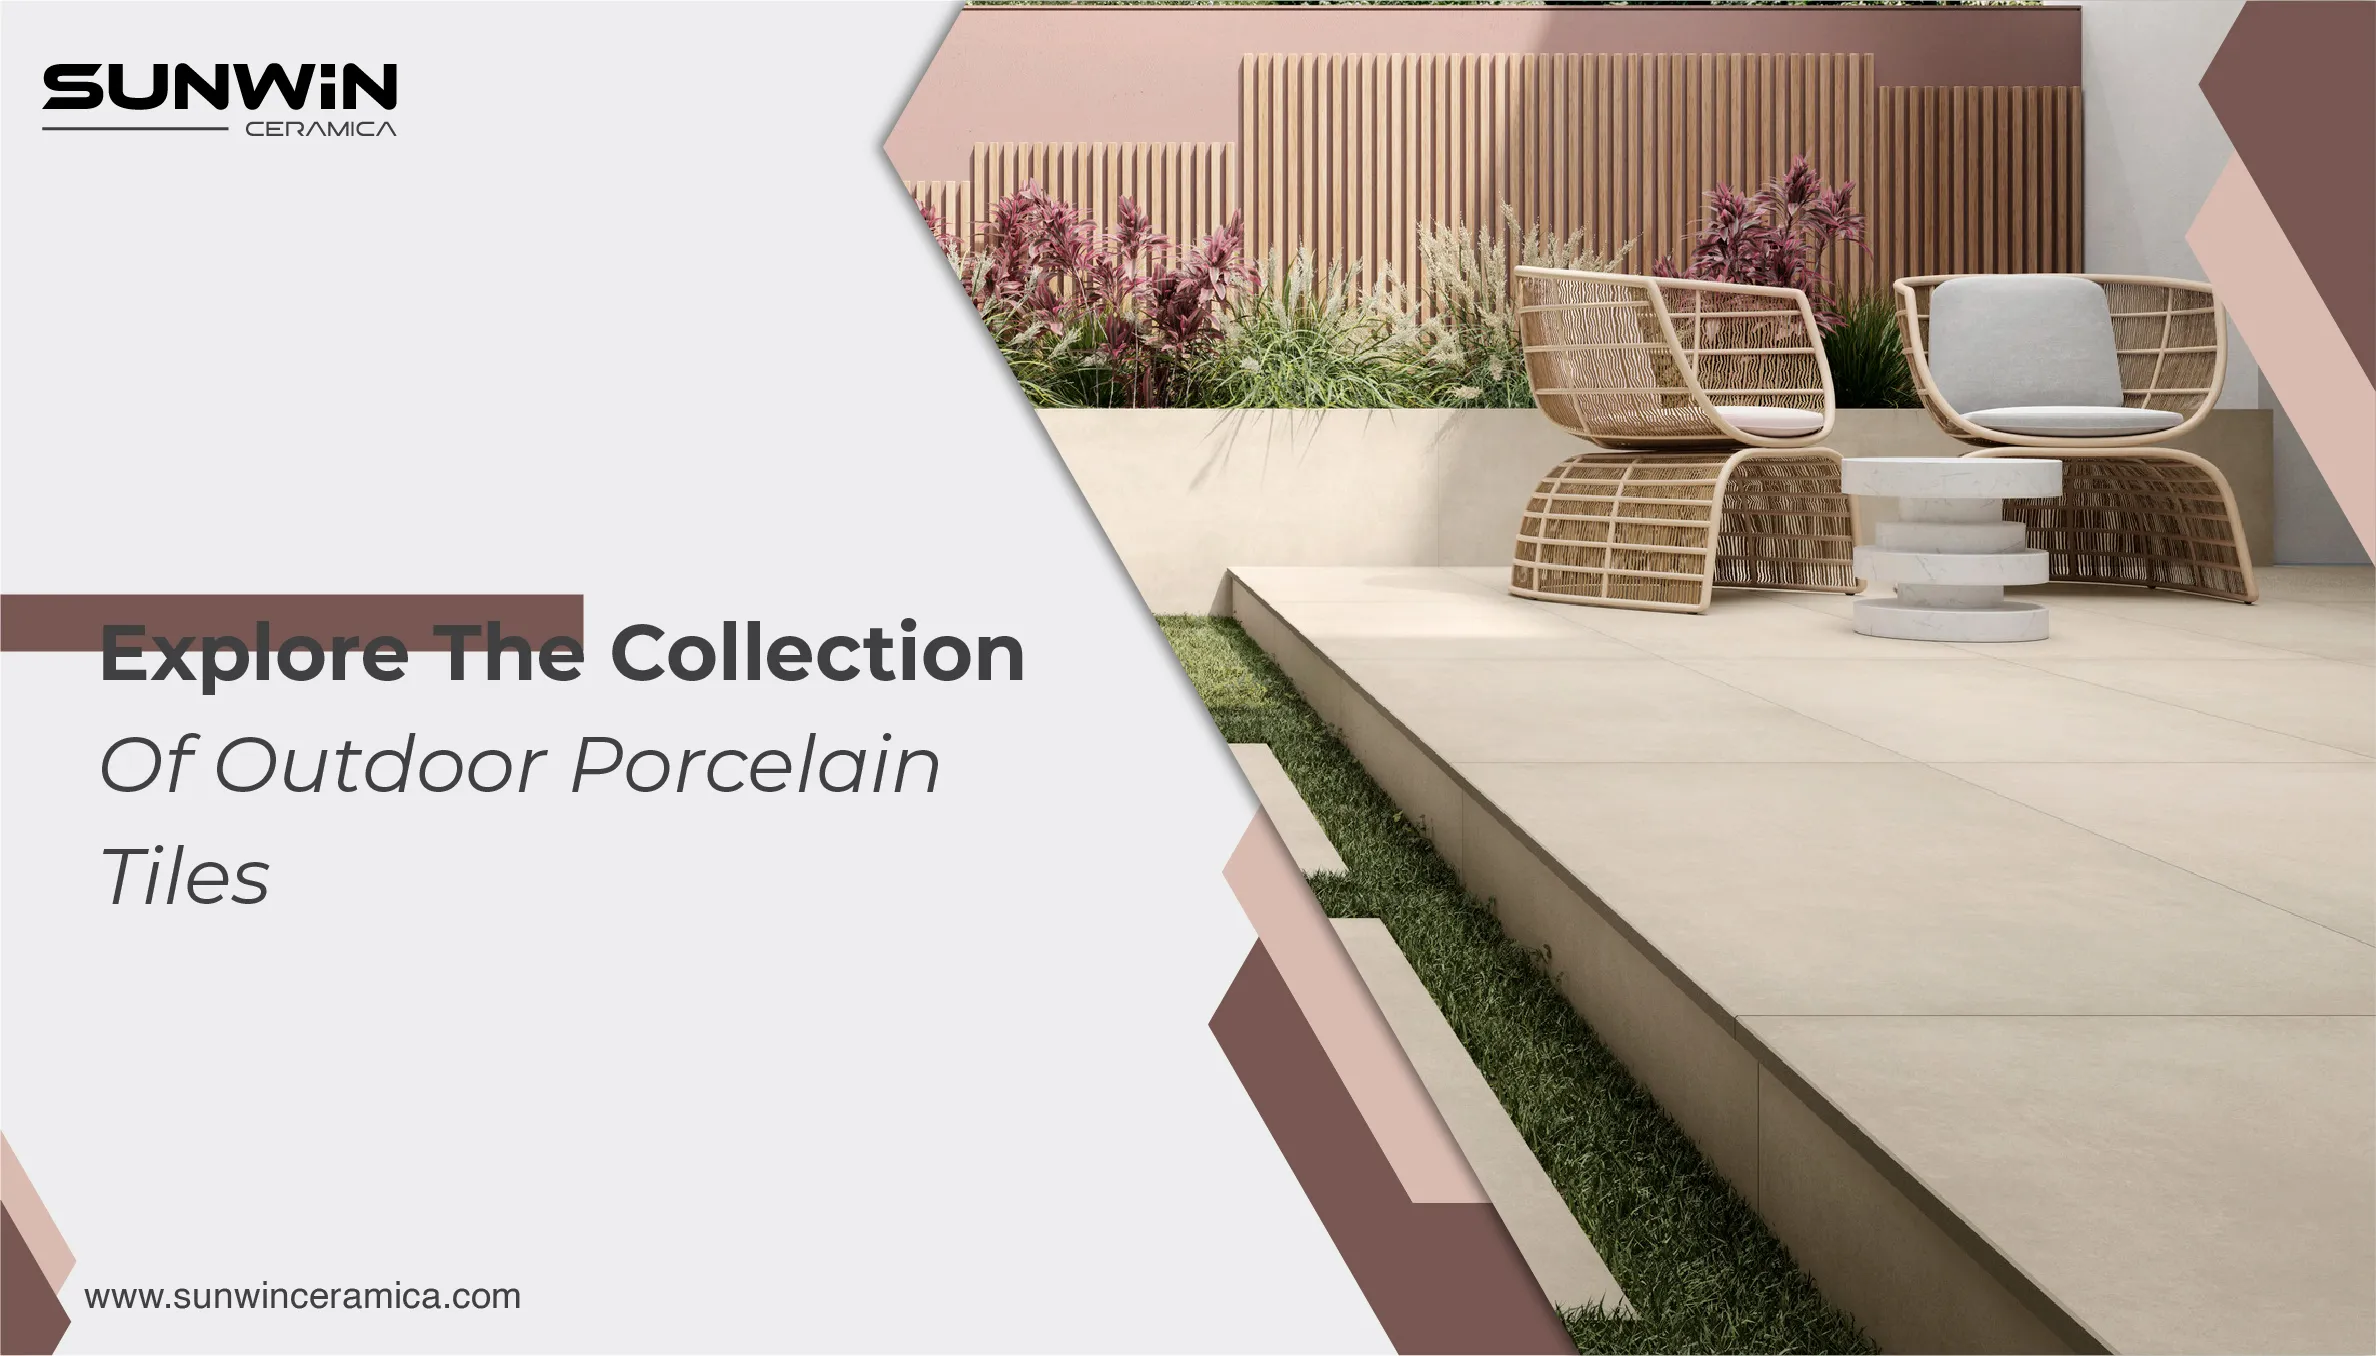 Explore The Collection Of Outdoor Porcelain Tiles By Sunwin Ceramica